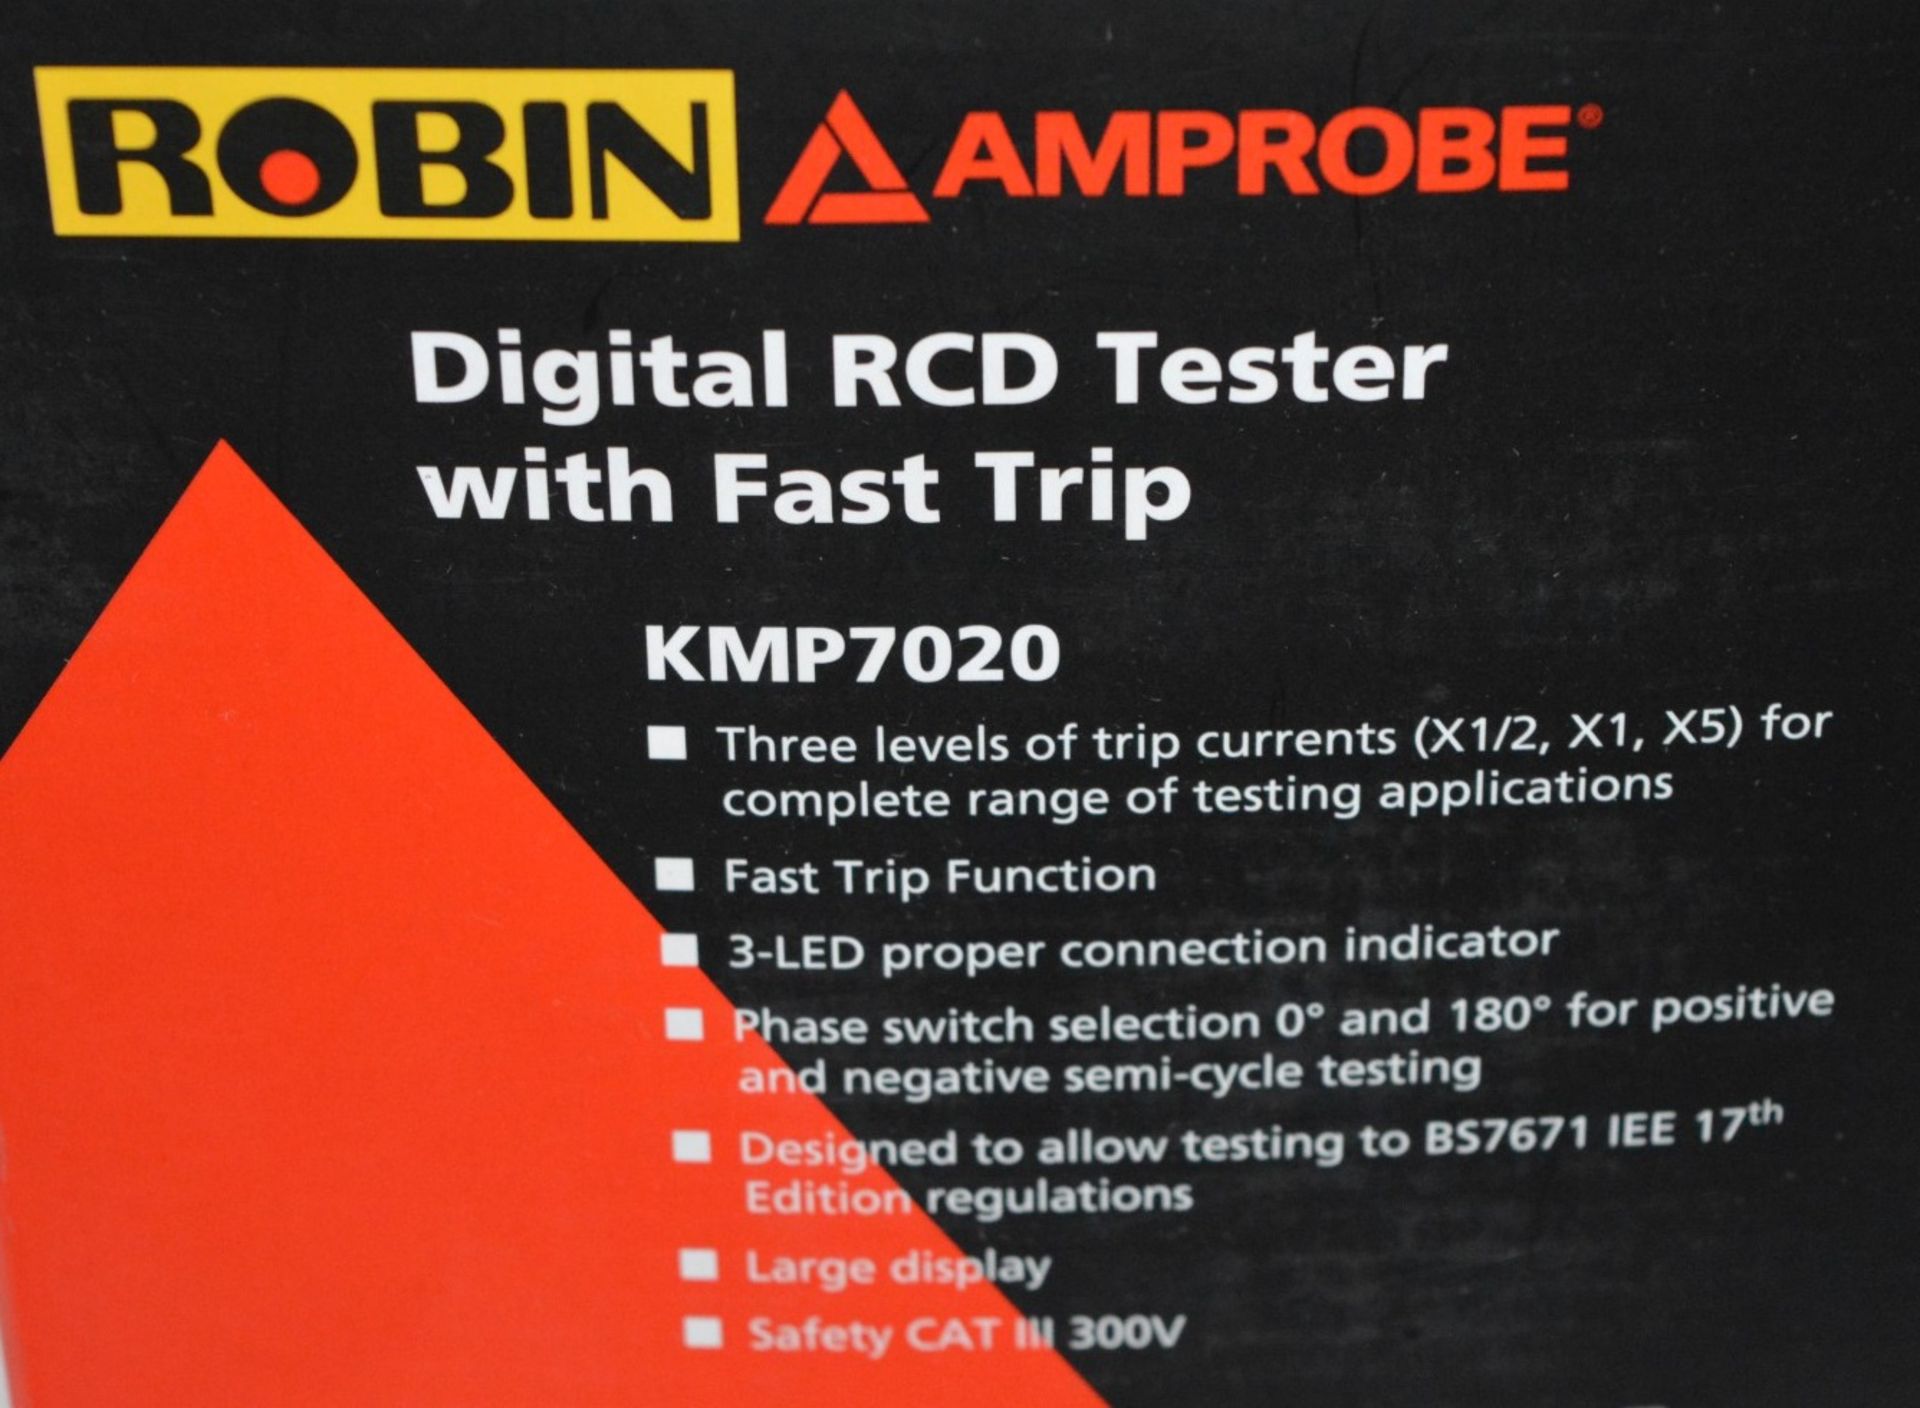 1 x Robin Amprobe Digital RCD Tester Wth Fast Trip - Model KMP7020 - Boxed With All Accessories - - Image 12 of 12